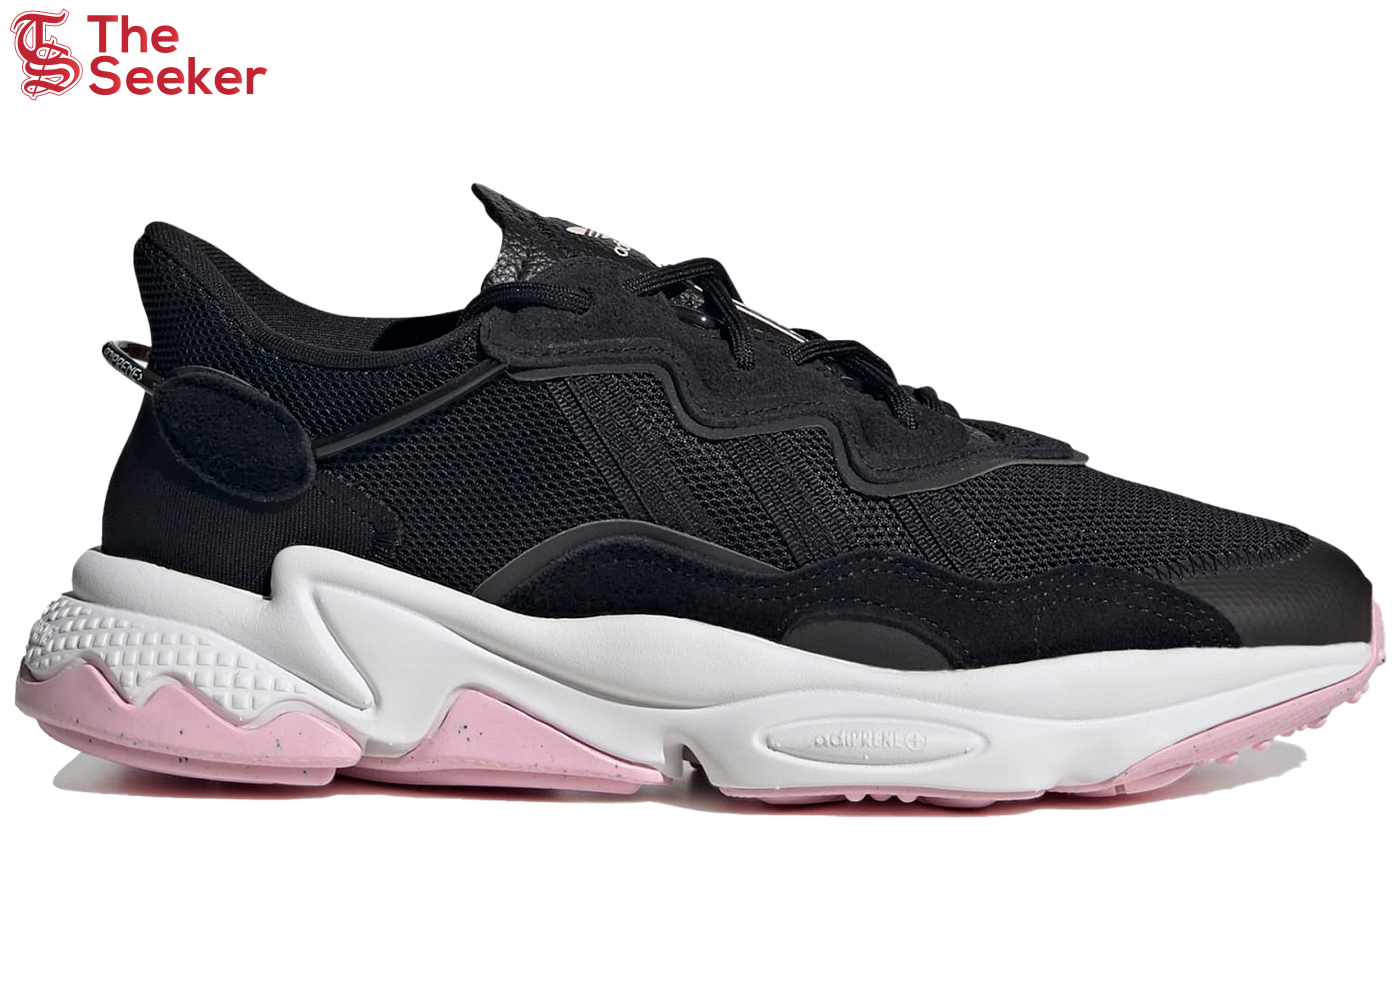 adidas Ozweego Core Black Clear Pink (Women's)